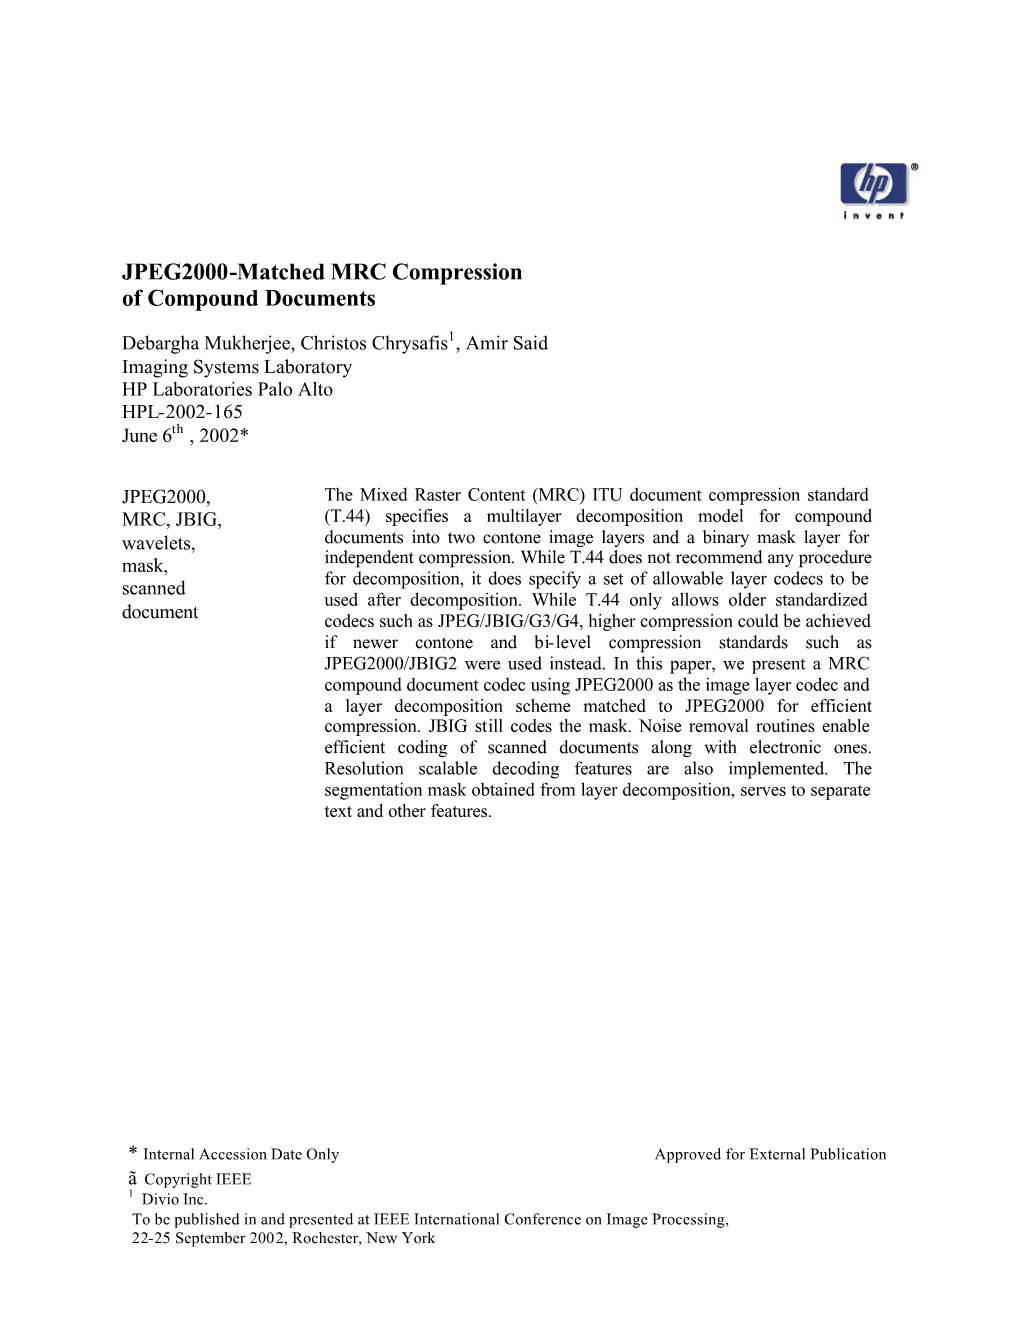 JPEG2000-Matched MRC Compression of Compound Documents